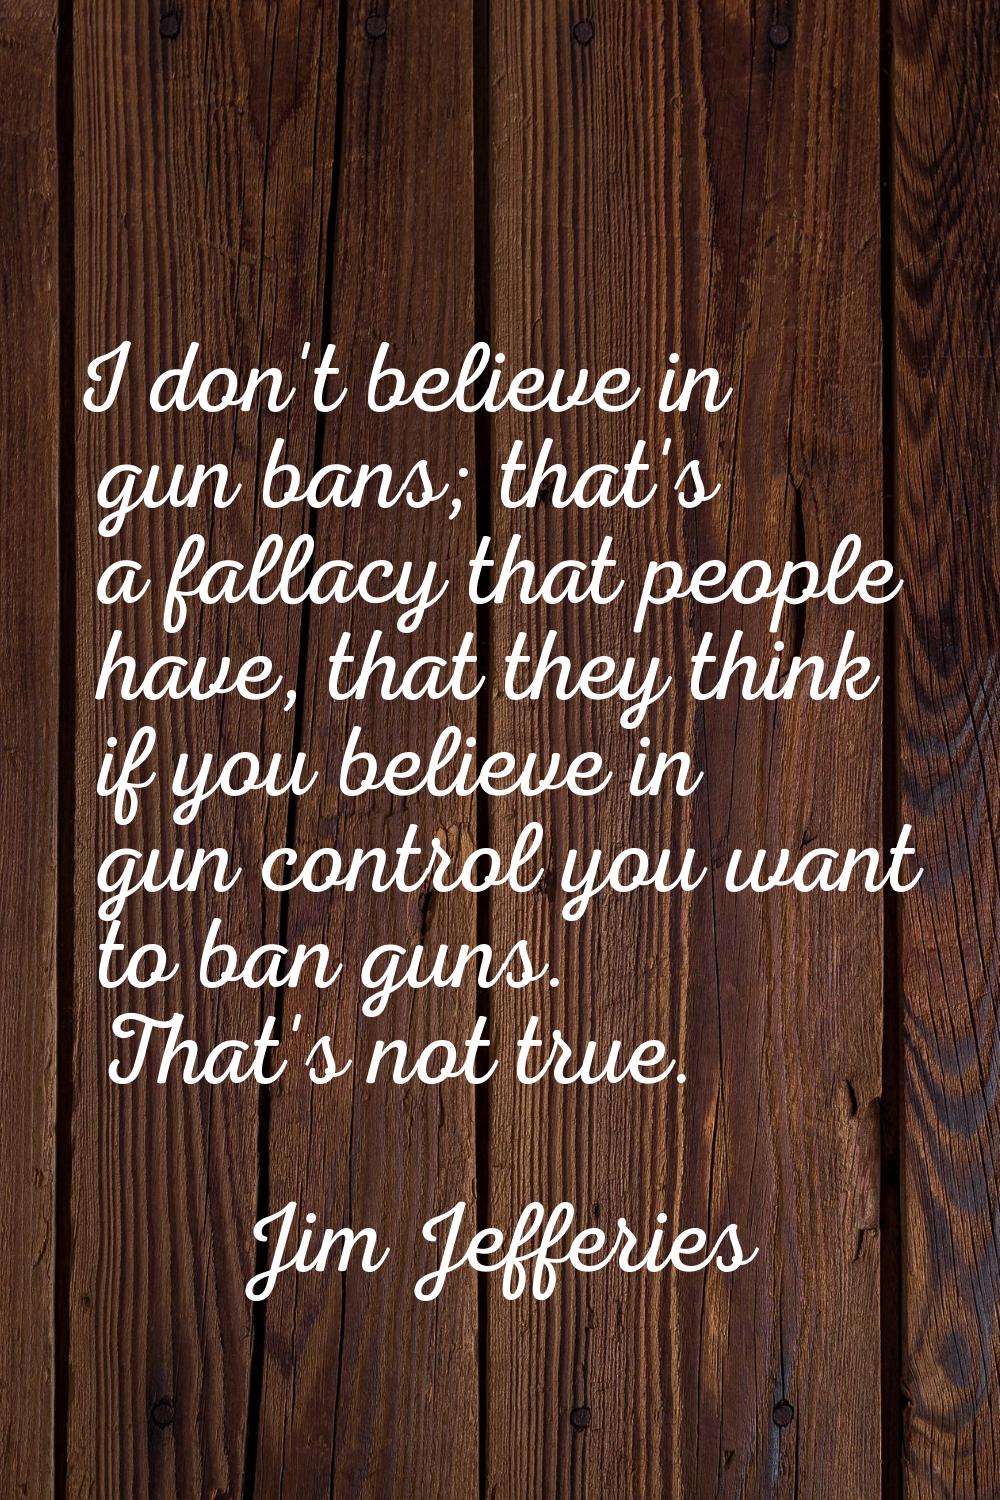 I don't believe in gun bans; that's a fallacy that people have, that they think if you believe in g